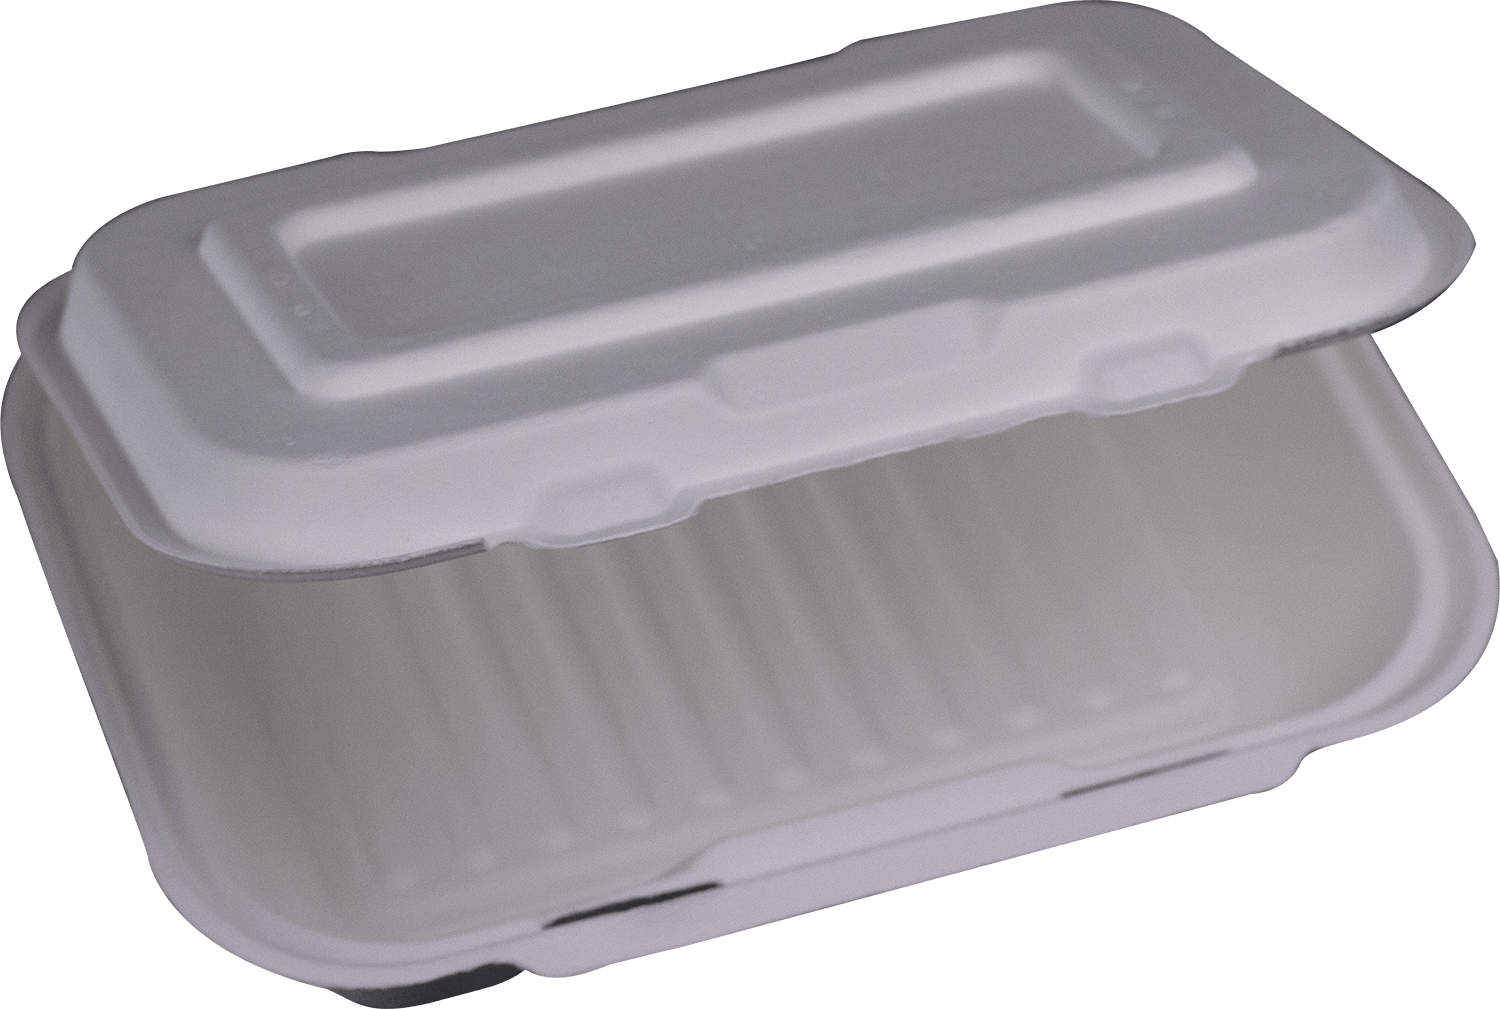 9X6 1C-COMPOSTABLE HINGED LID CONTAINER